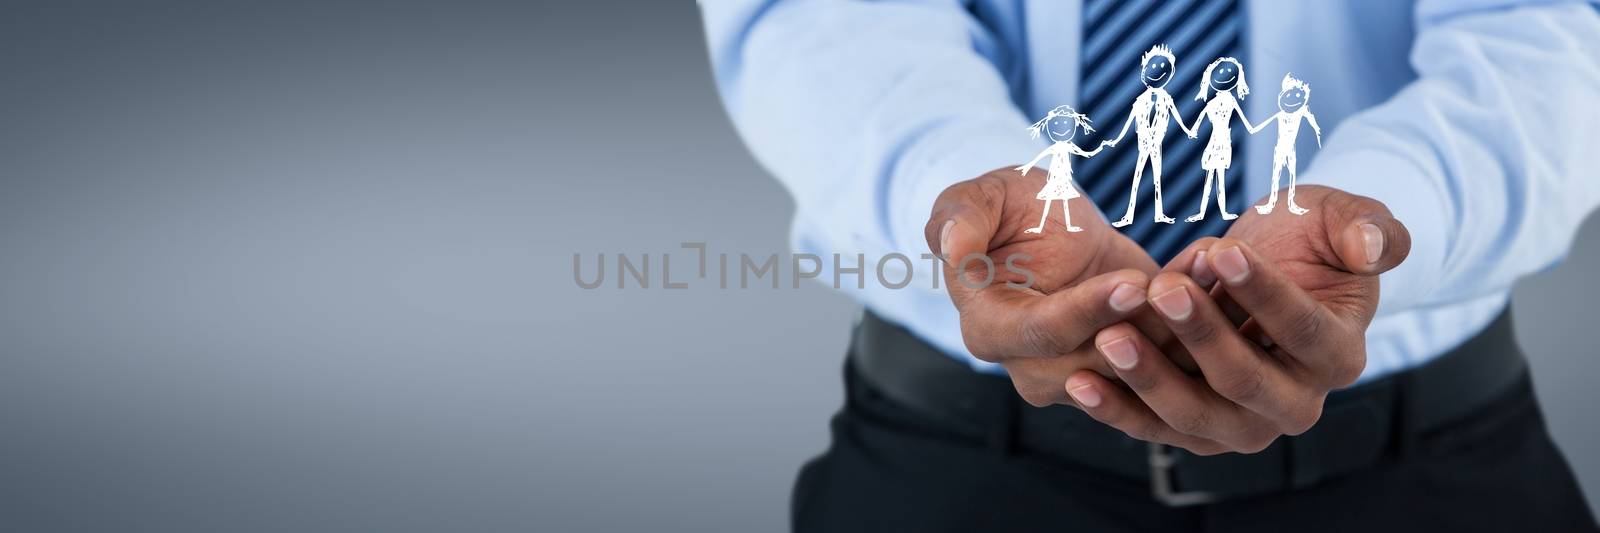 Digital composite of Man holding family icon against grey background as family insurance concept